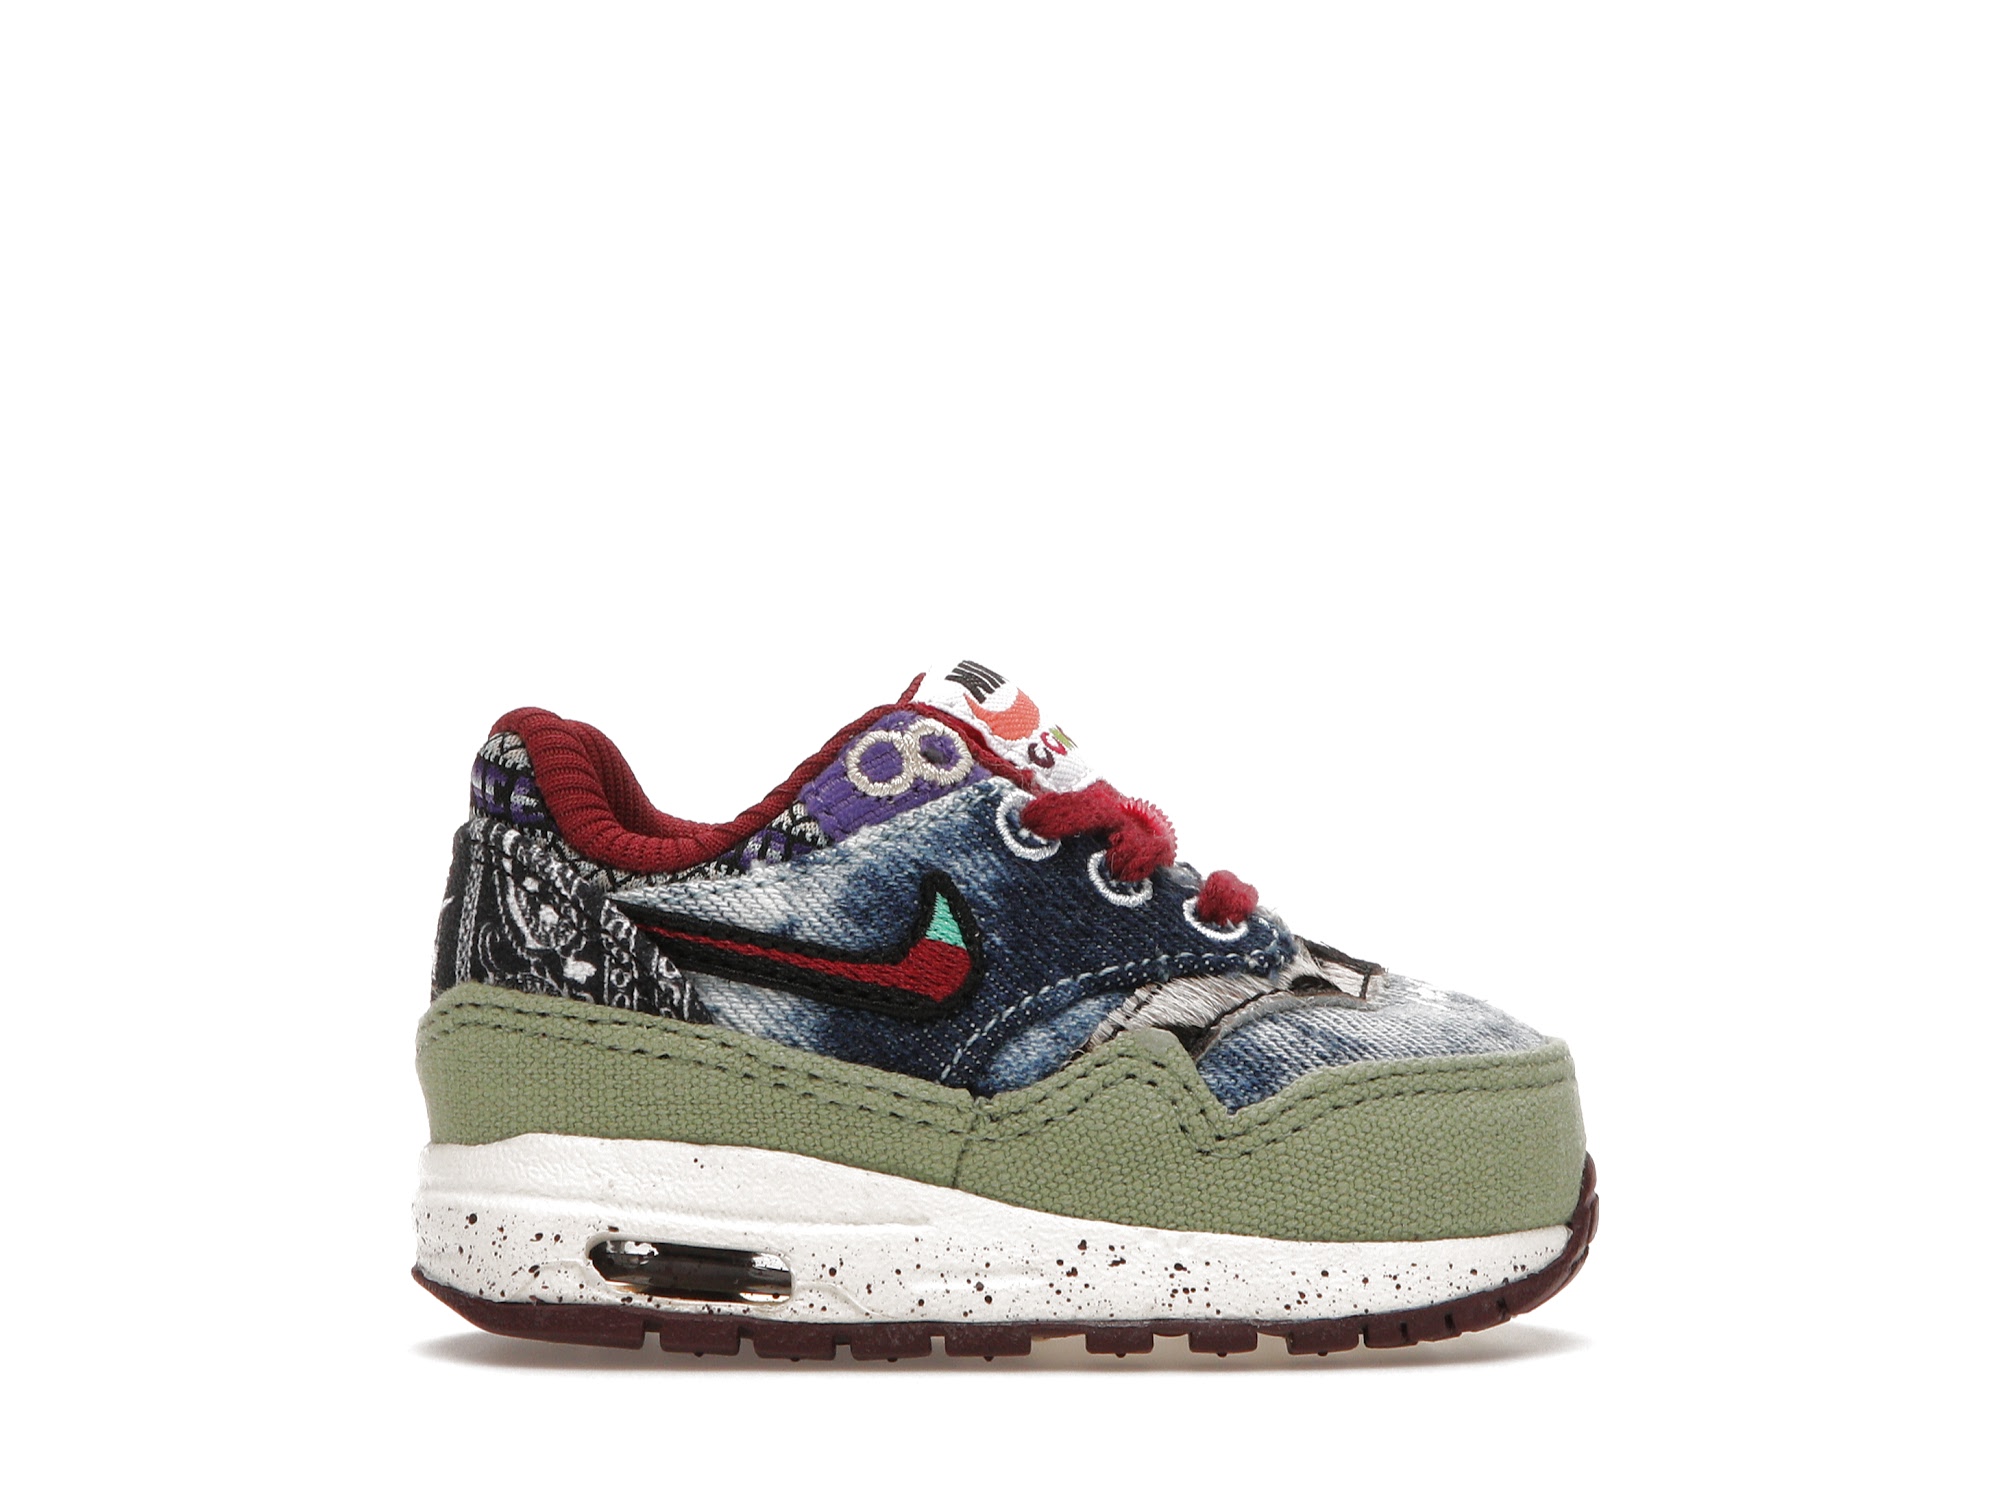 Nike Air Max 1 SP Concepts Mellow (TD) Toddler - DR2363-300 - US